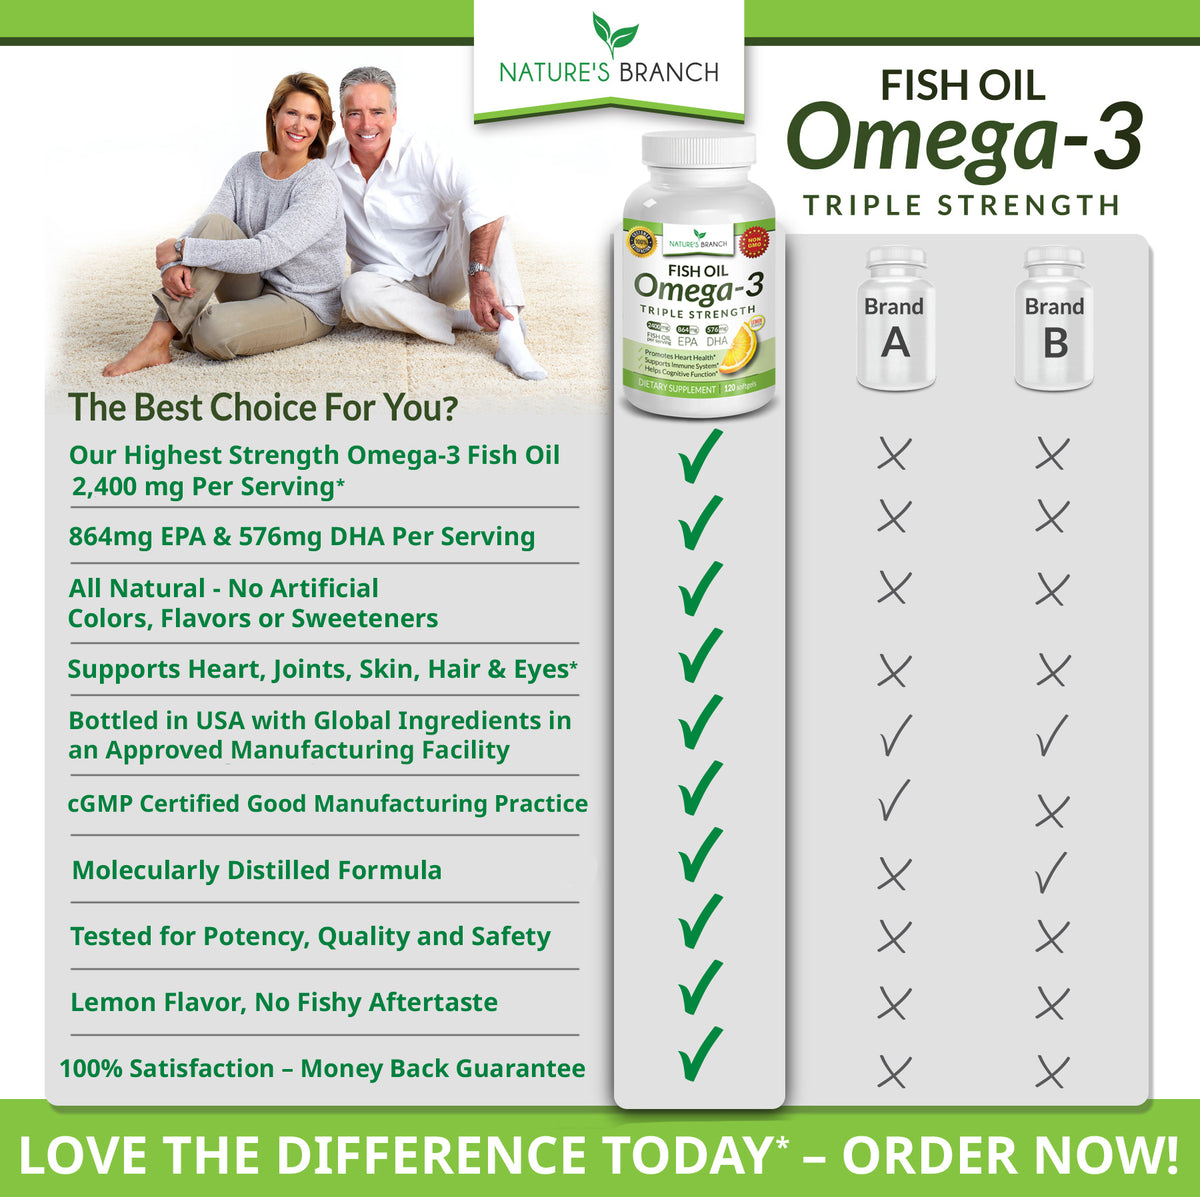 Comparison table showing the benefits of natures branch omega 3 fish oil against competitors